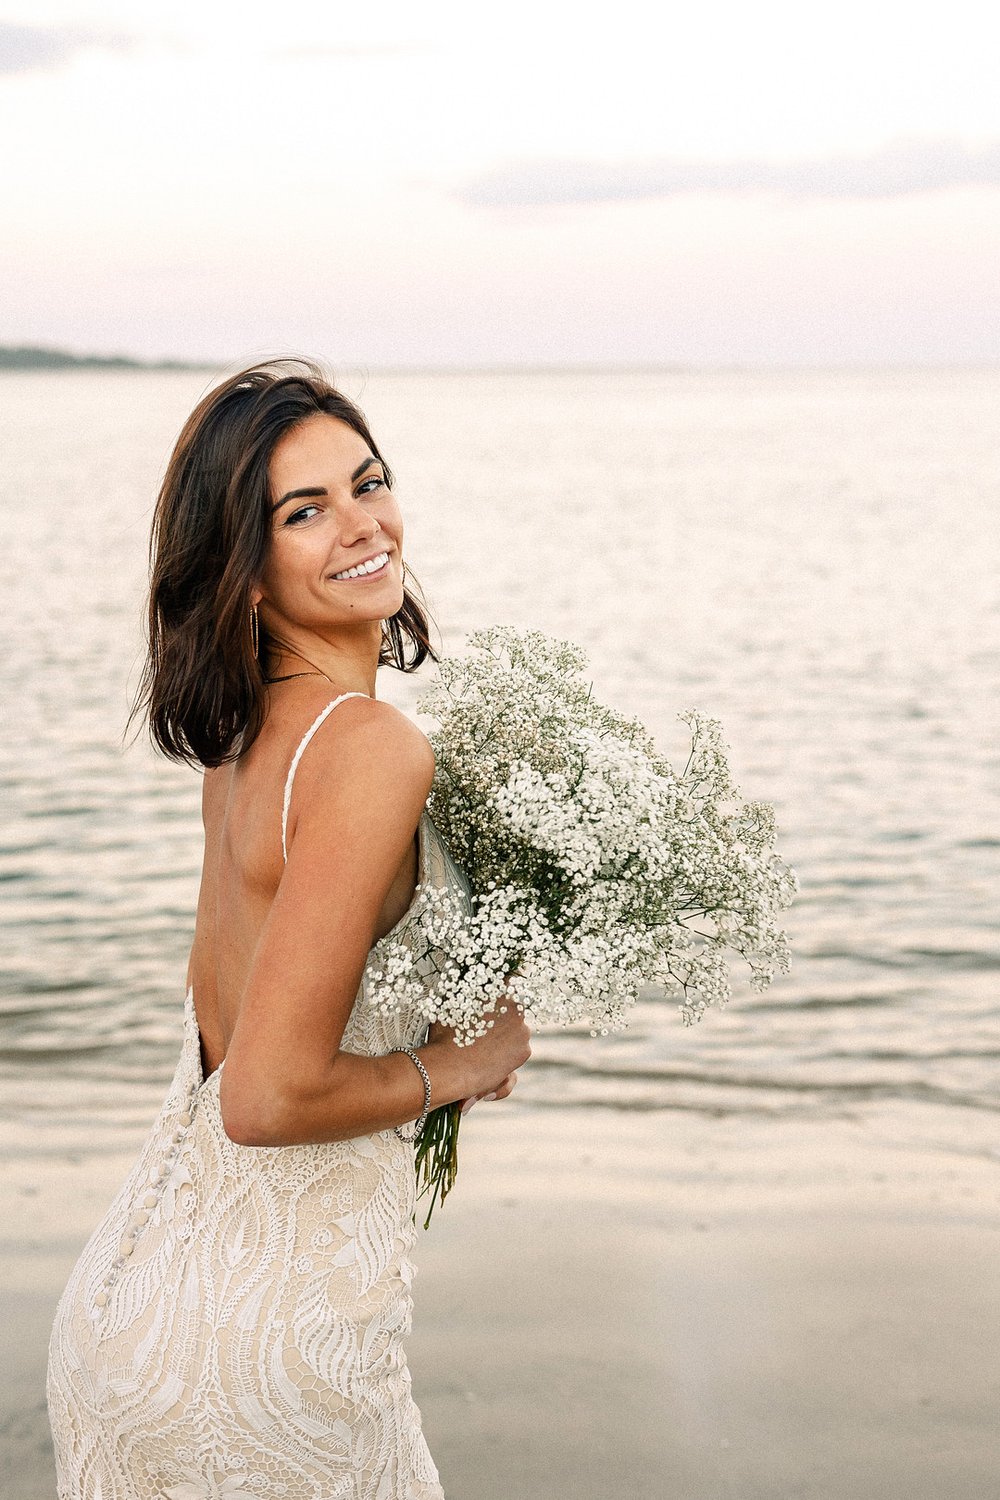 A beachy bridal moment_Carly Terry Photography_AW BRIDAL-1586_low.jpg